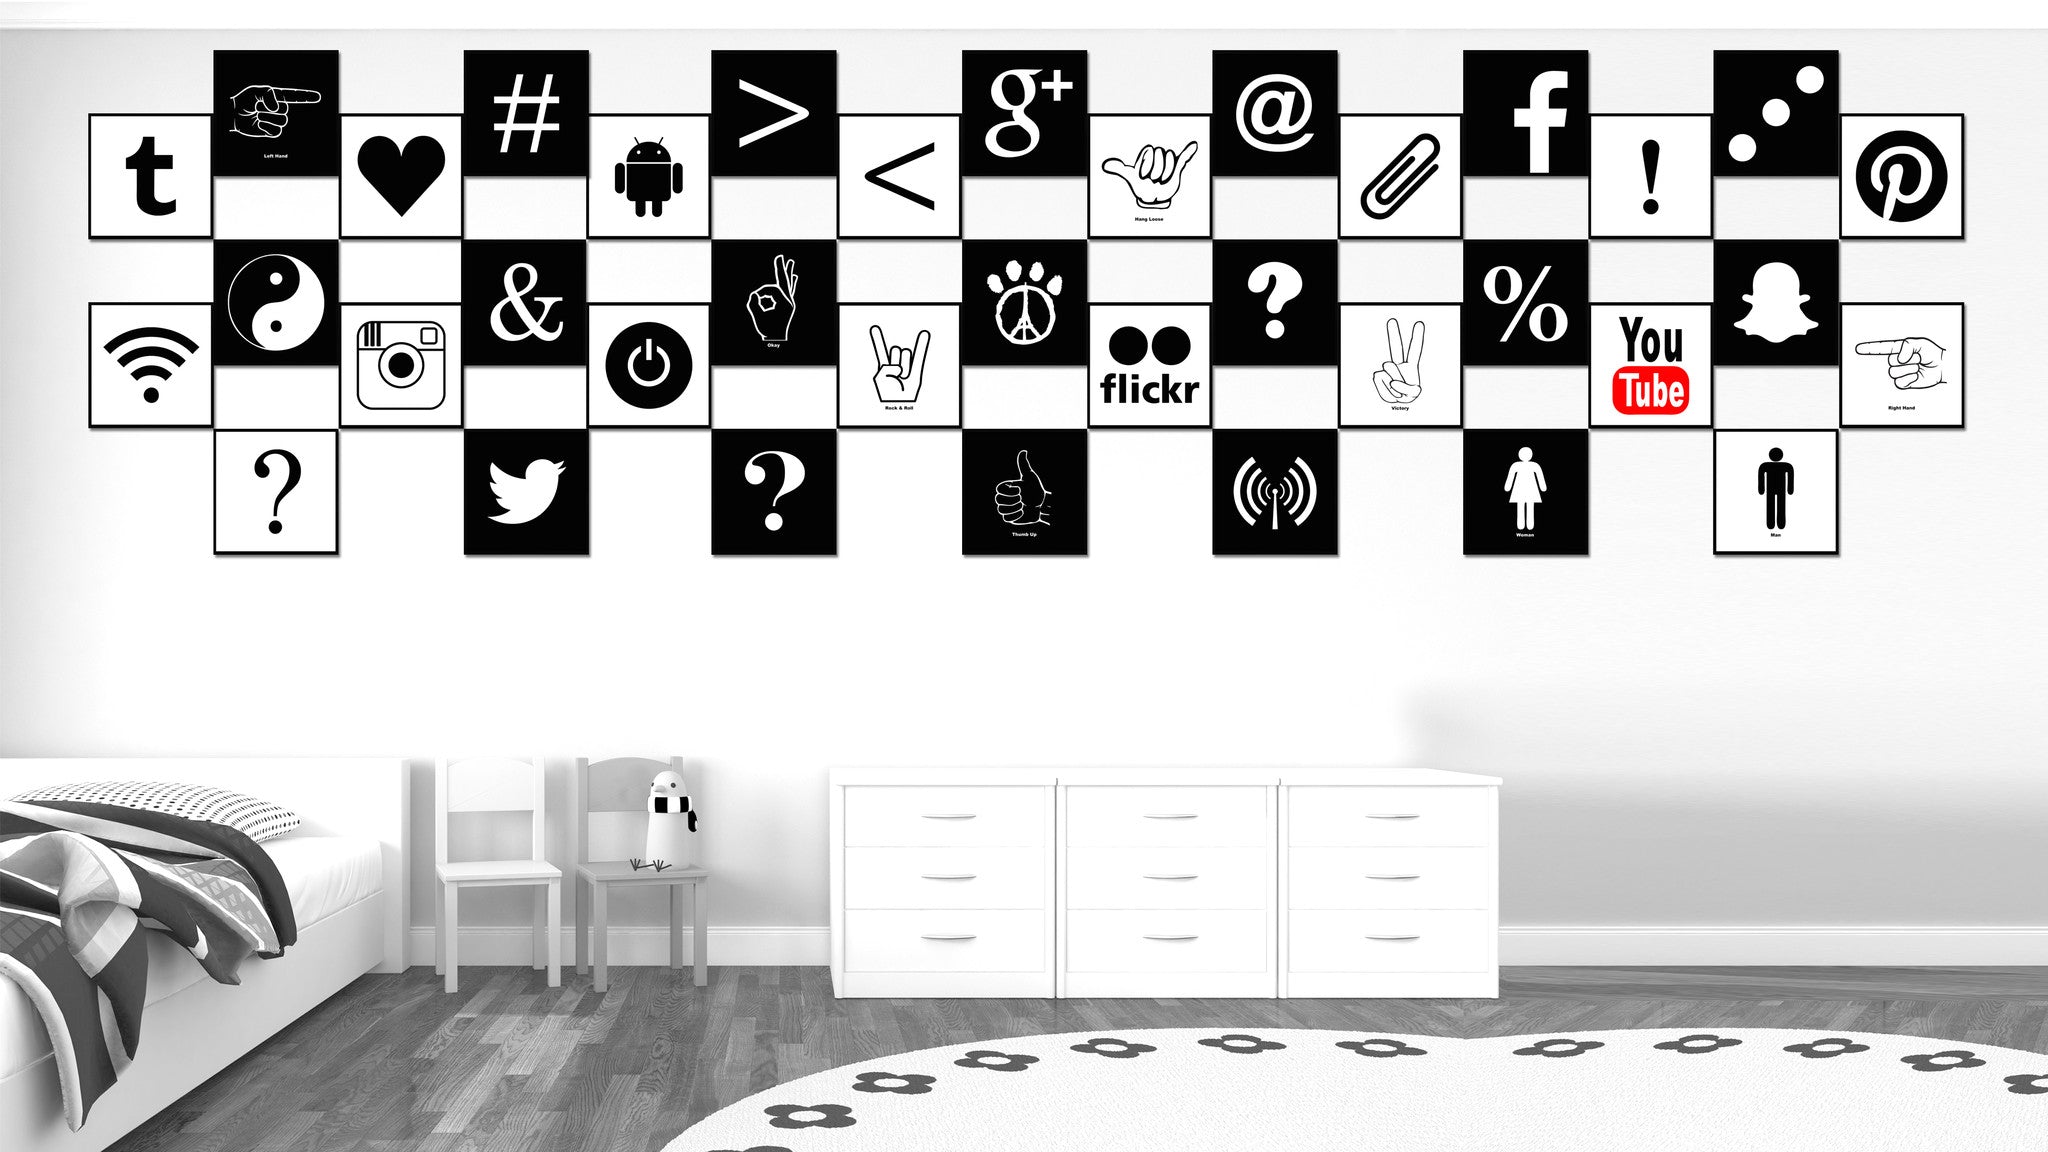 Right Social Media Icon Canvas Print Picture Frame Wall Art Home Decor